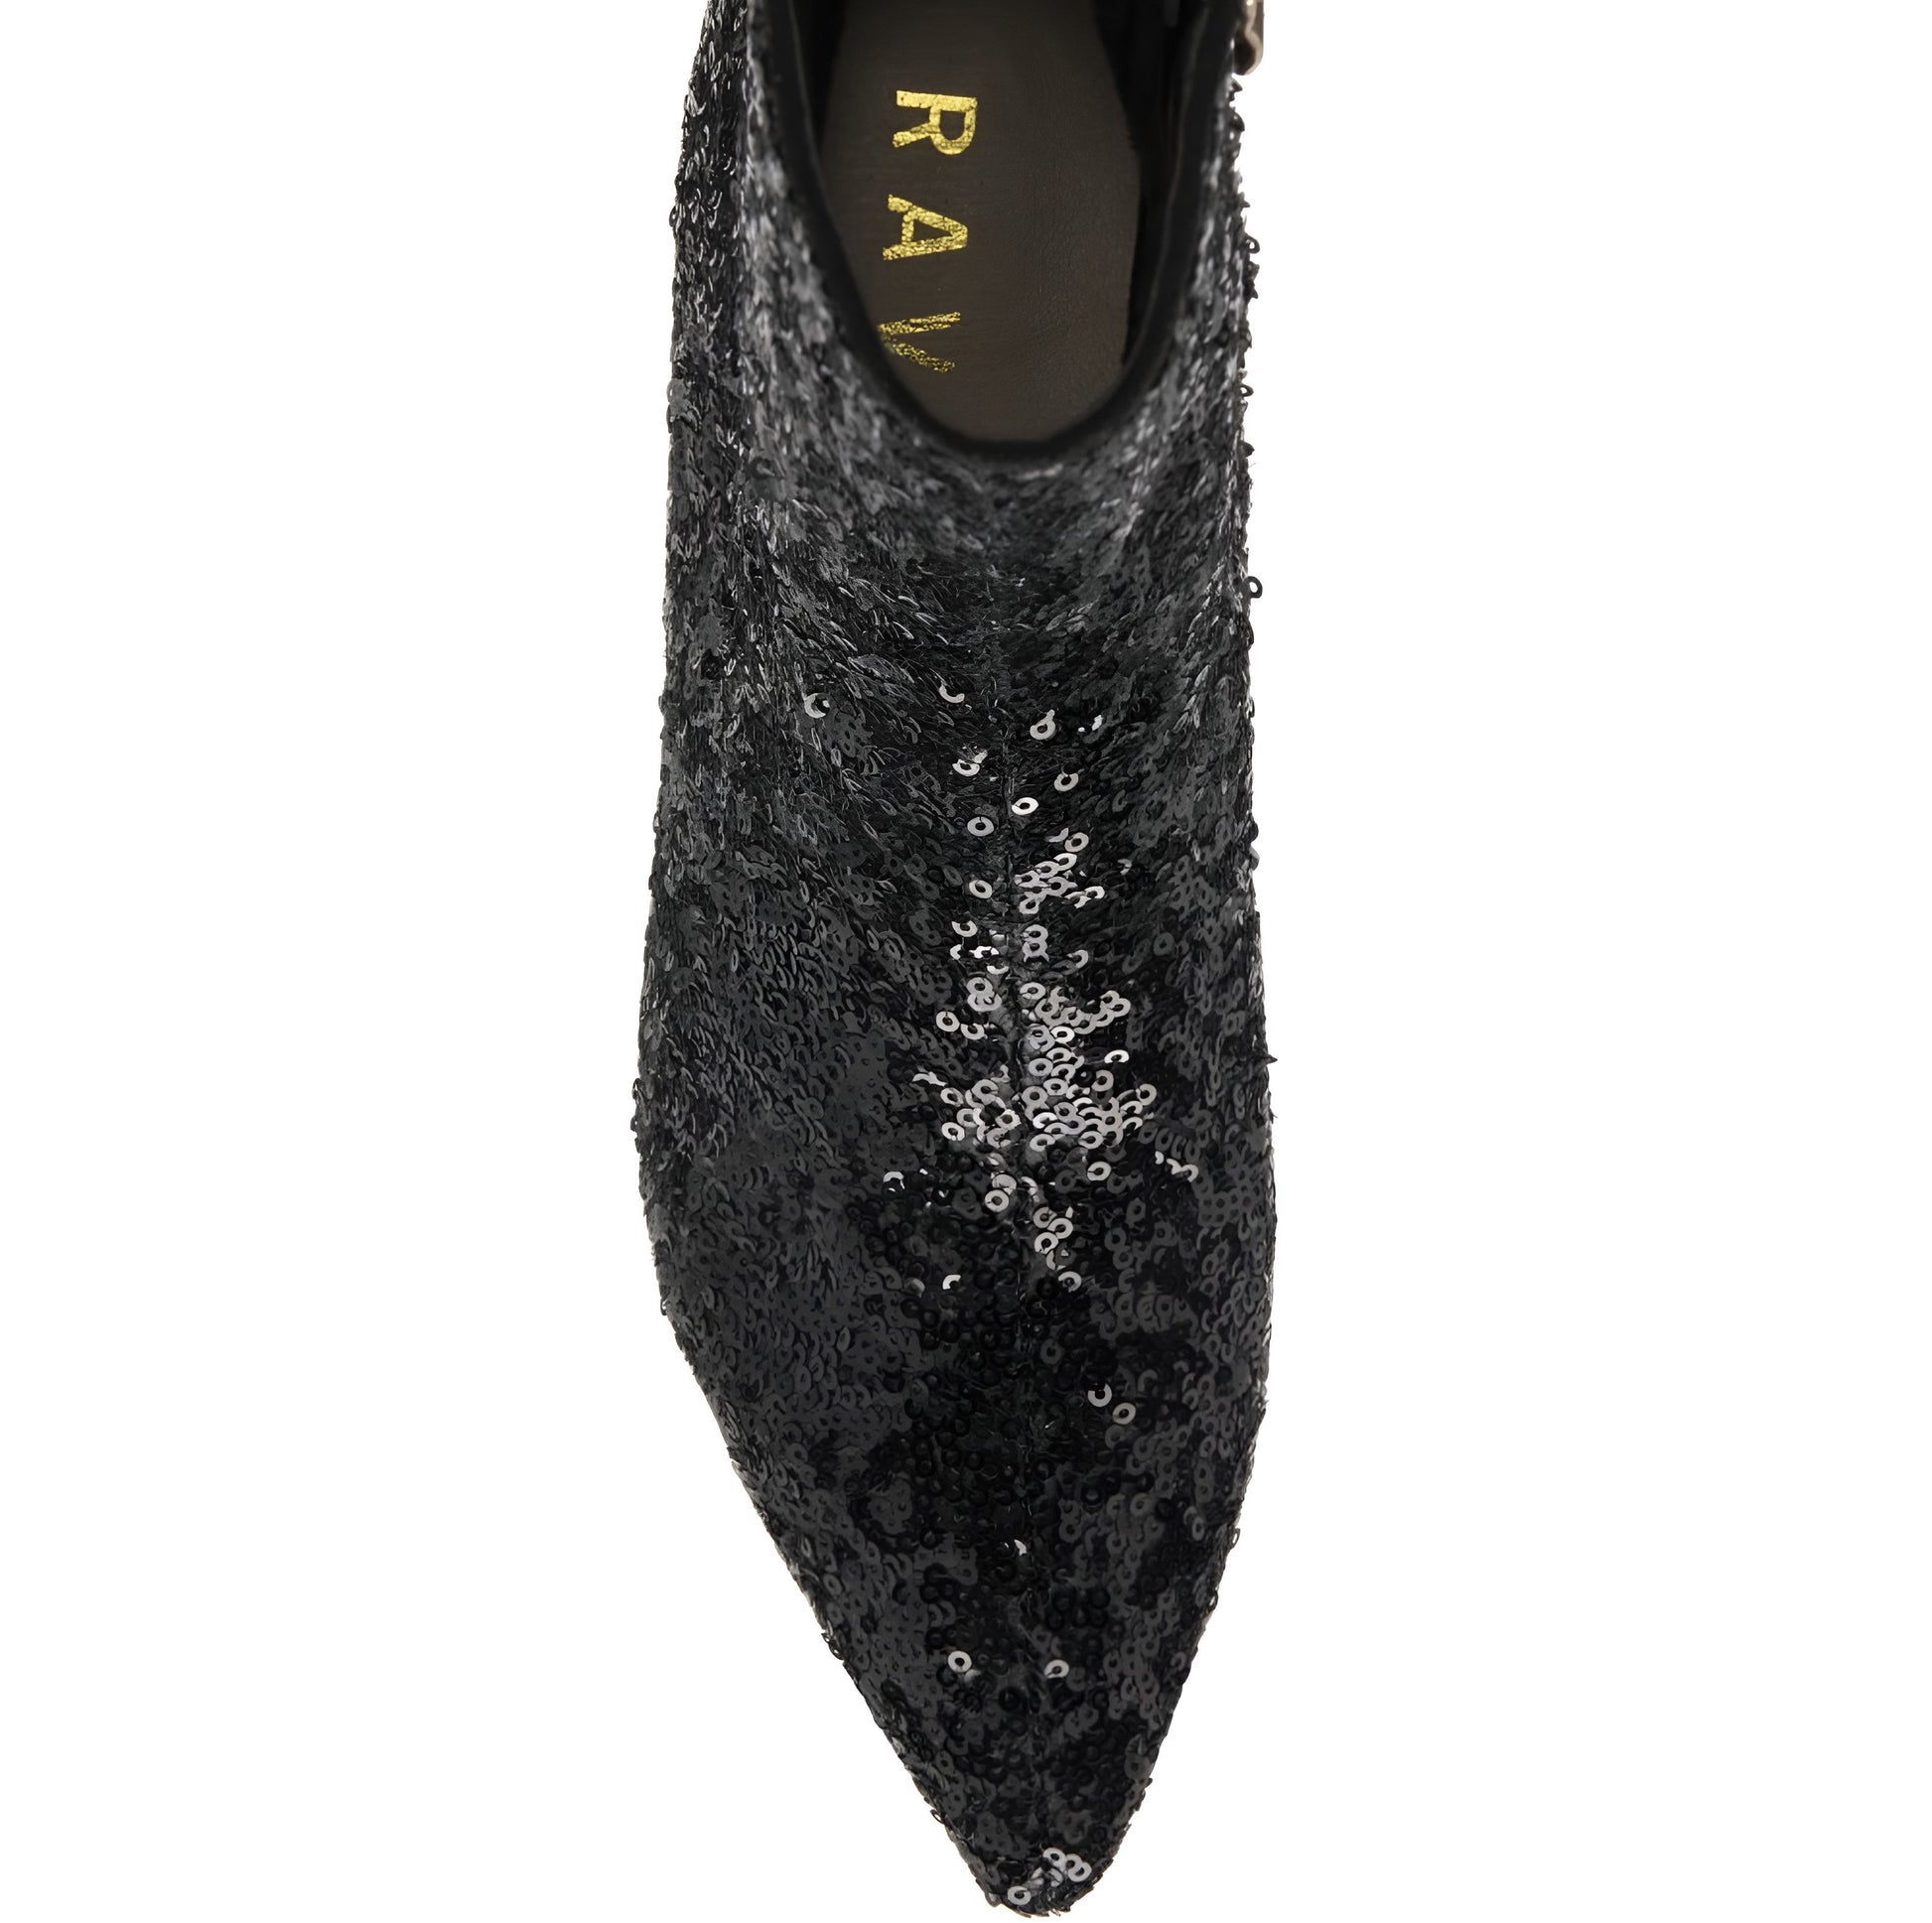 Ravel Black Sequin Currans Pointed-Toe Ankle Boots